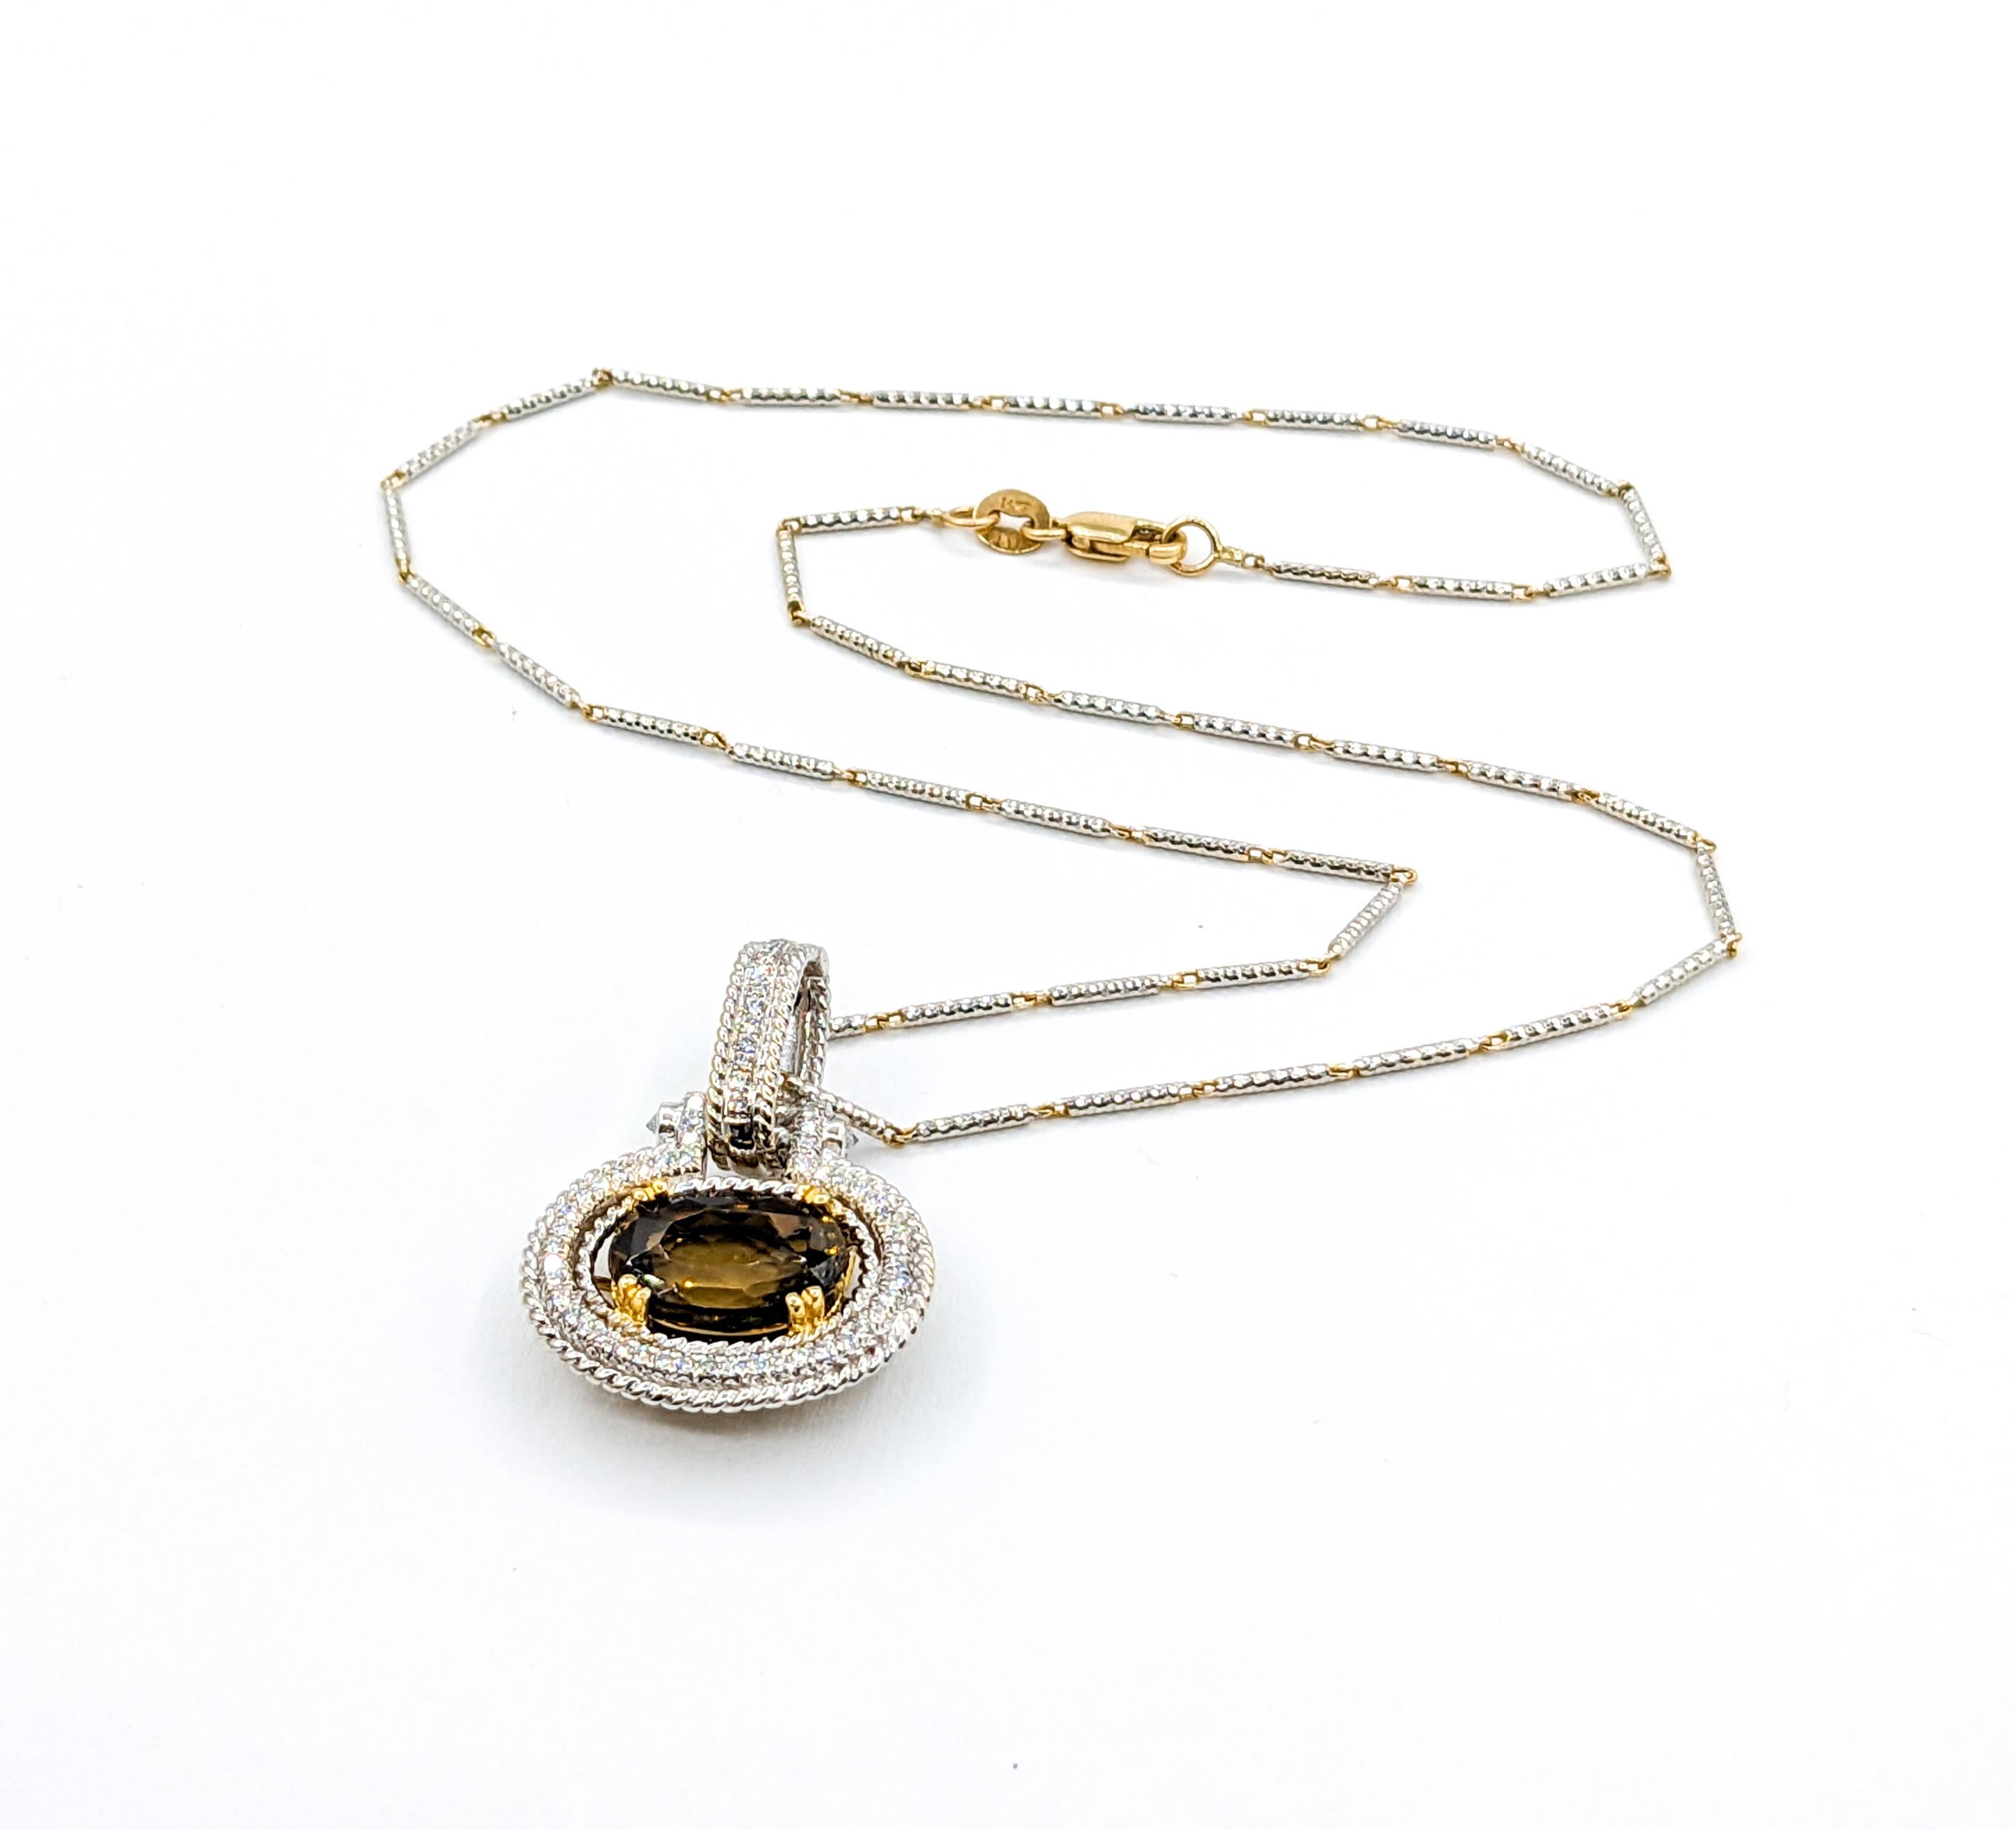 Discover the Radiance: 18k Two-Tone Amber Spinel & Diamond Necklace

Discover the Radiance of this captivating necklace, exquisitely crafted in a blend of 18kt white and yellow gold, complemented by a sleek 14k gold chain. The centerpiece of this